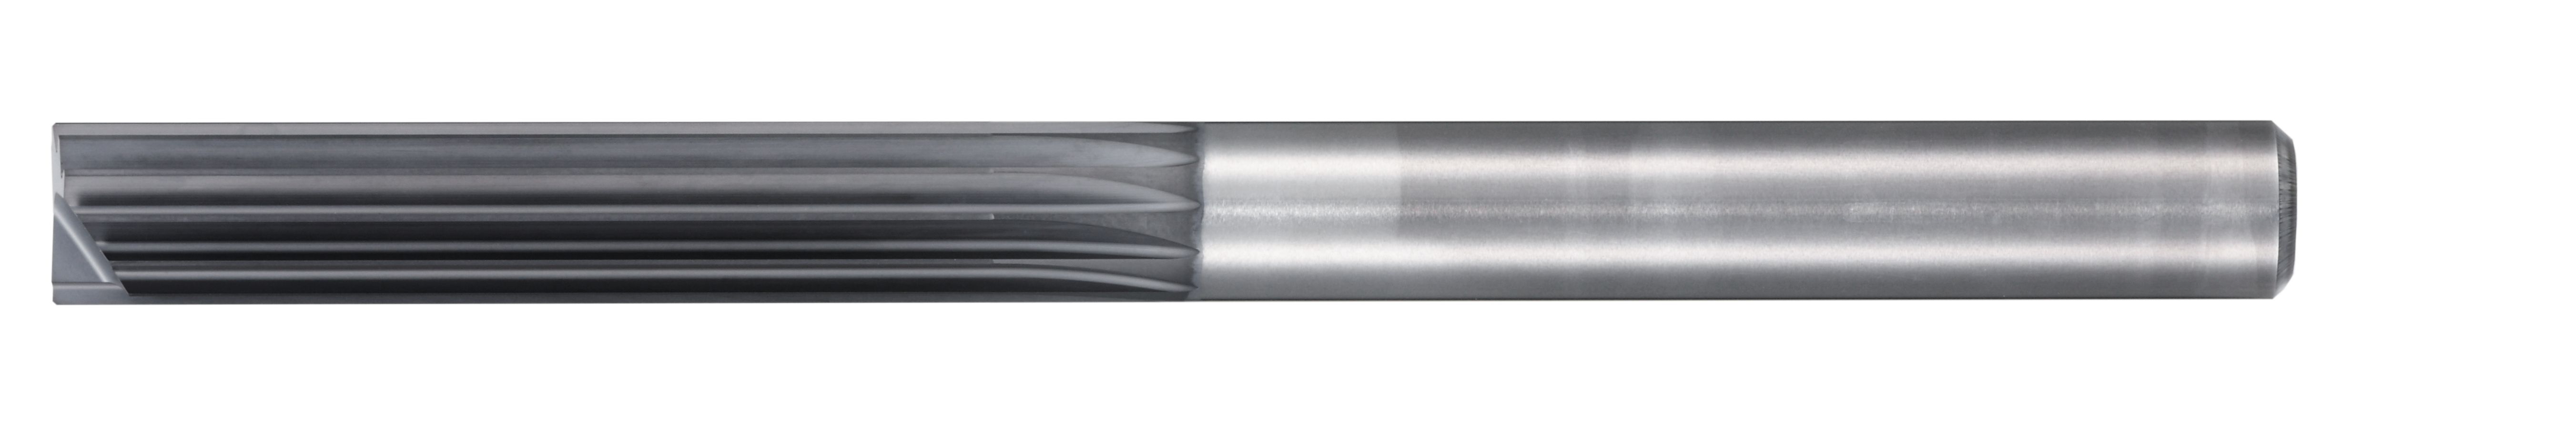 Grooving/Shouldering Multi-Flute End Mill for CFRP with End Flute CR100 6719 6719-010.000